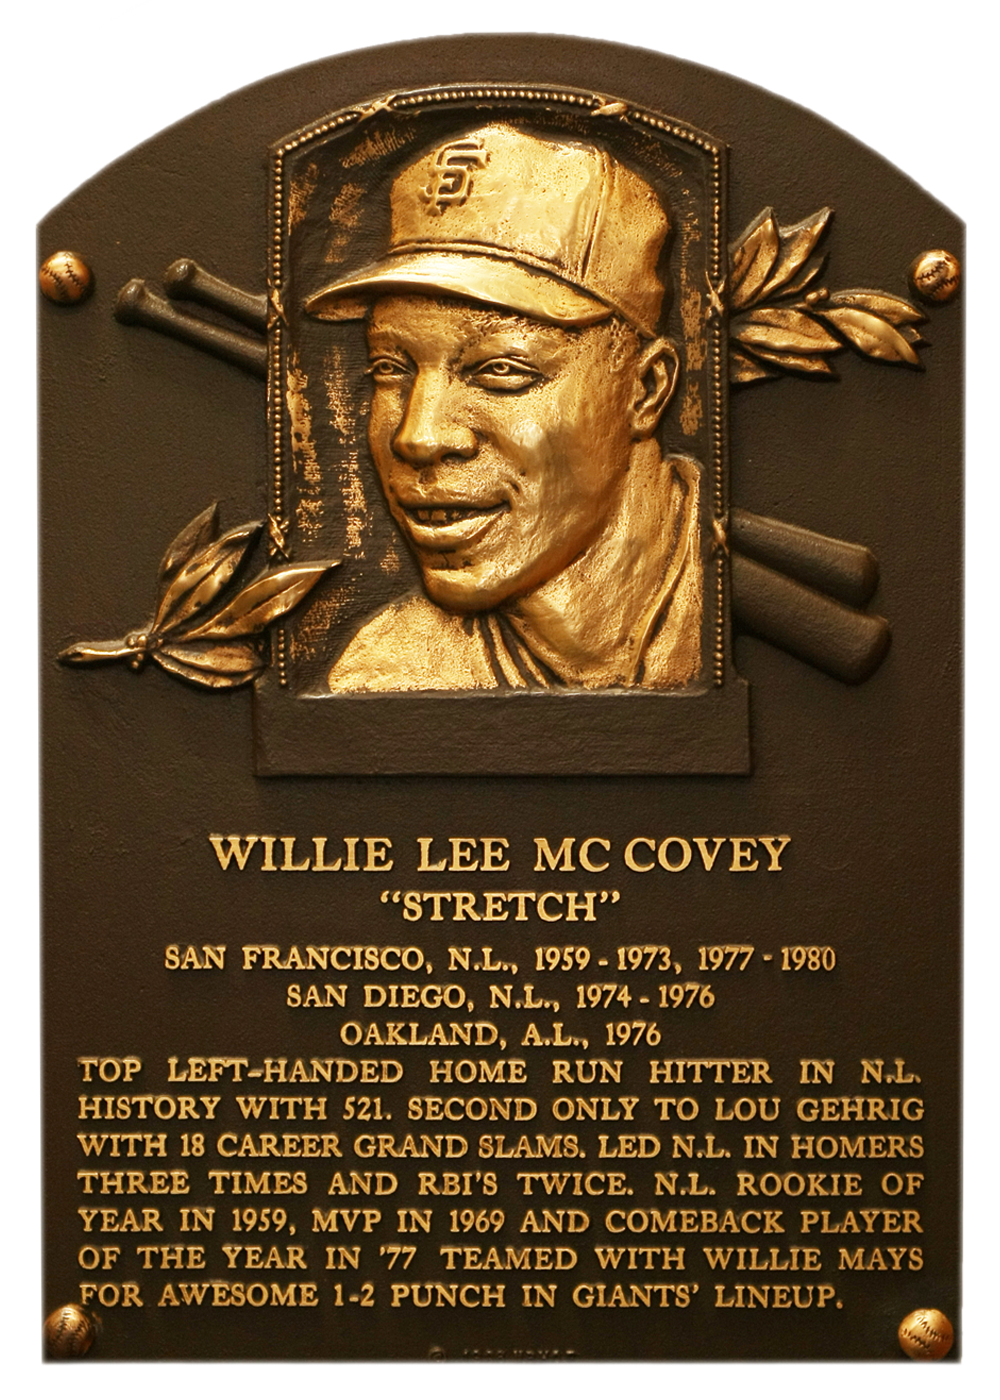 Willie McCovey Hall of Fame plaque